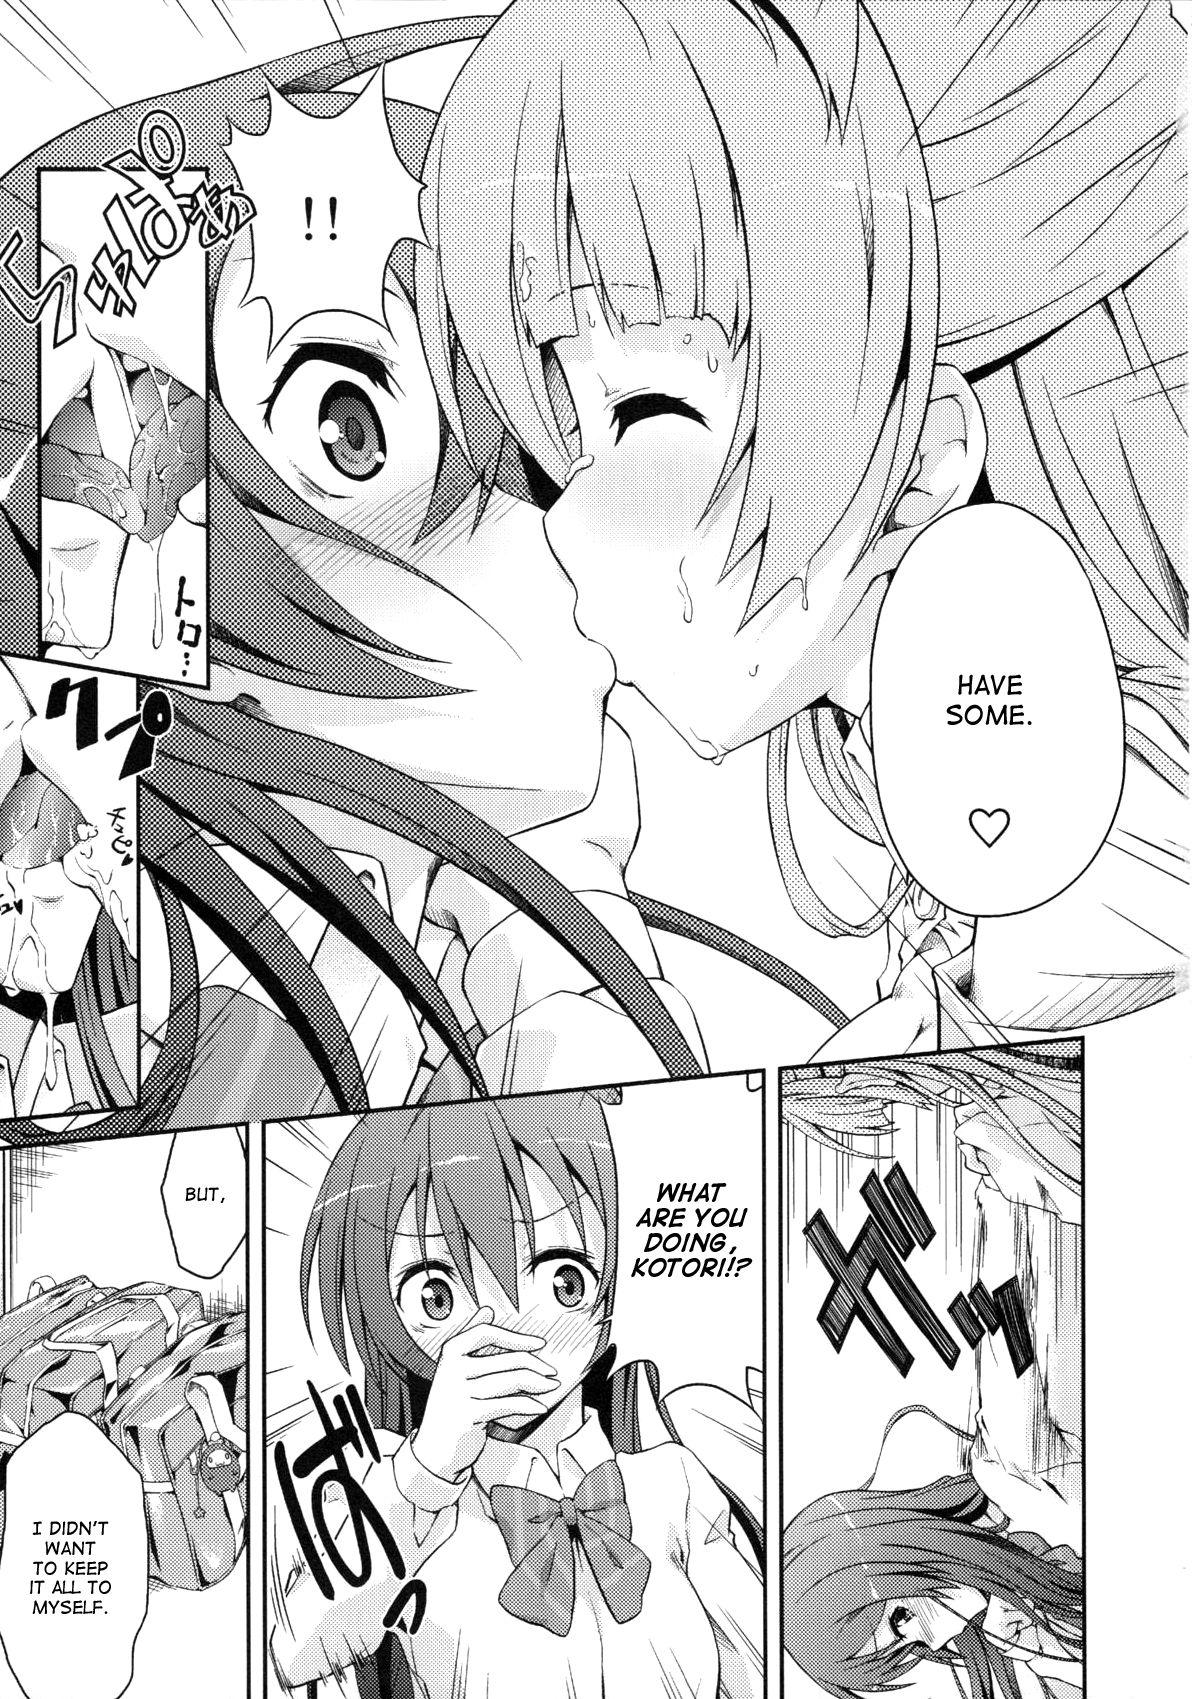 Blows Love Linve! - Love live Culo - Page 10